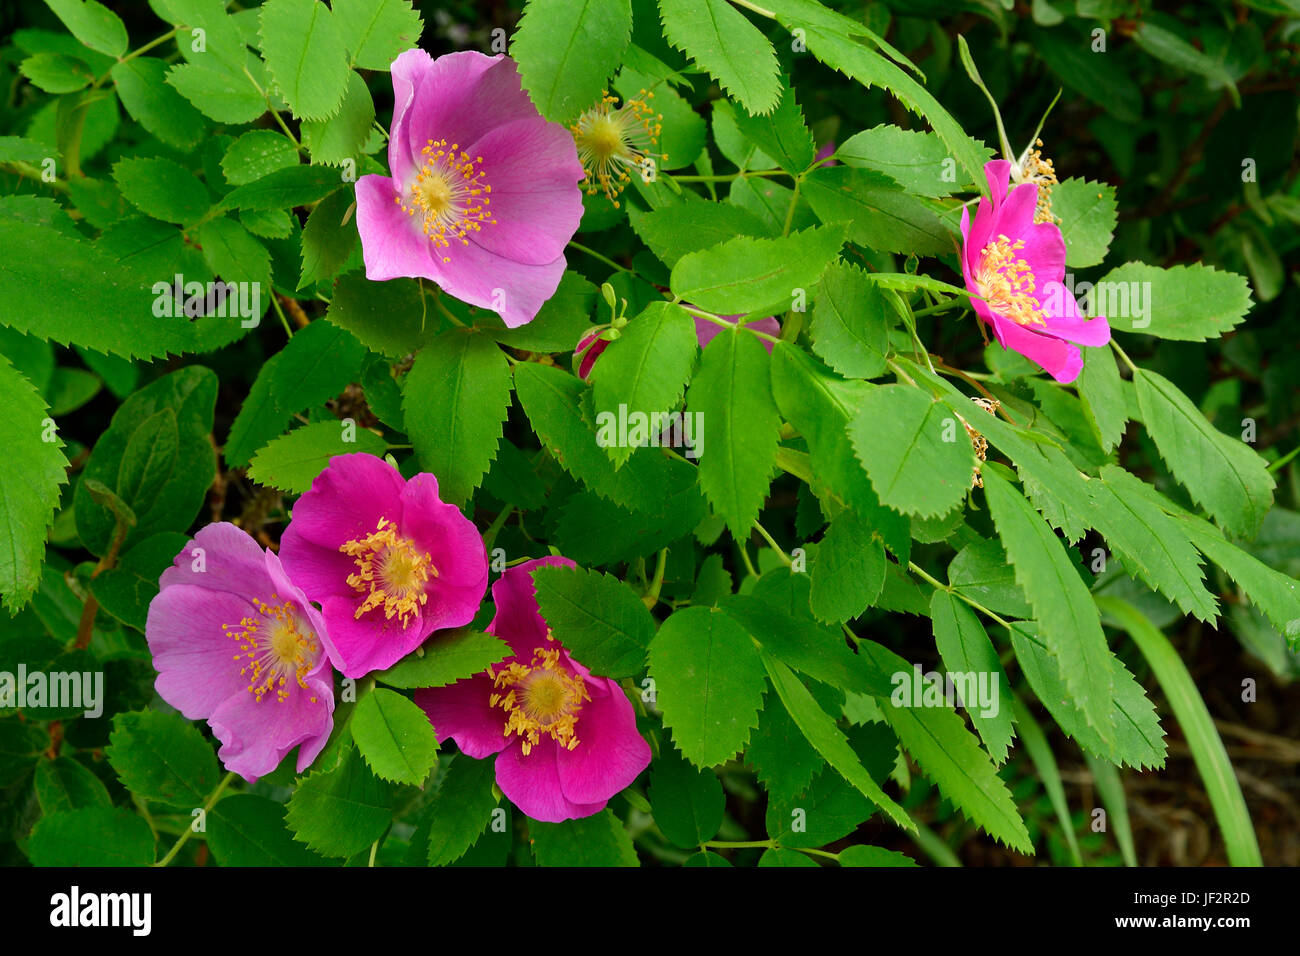 A wild Alberta rose bush (Rosa acicularis),  the official floral emblem of the Province of Alberta, Canada. Stock Photo